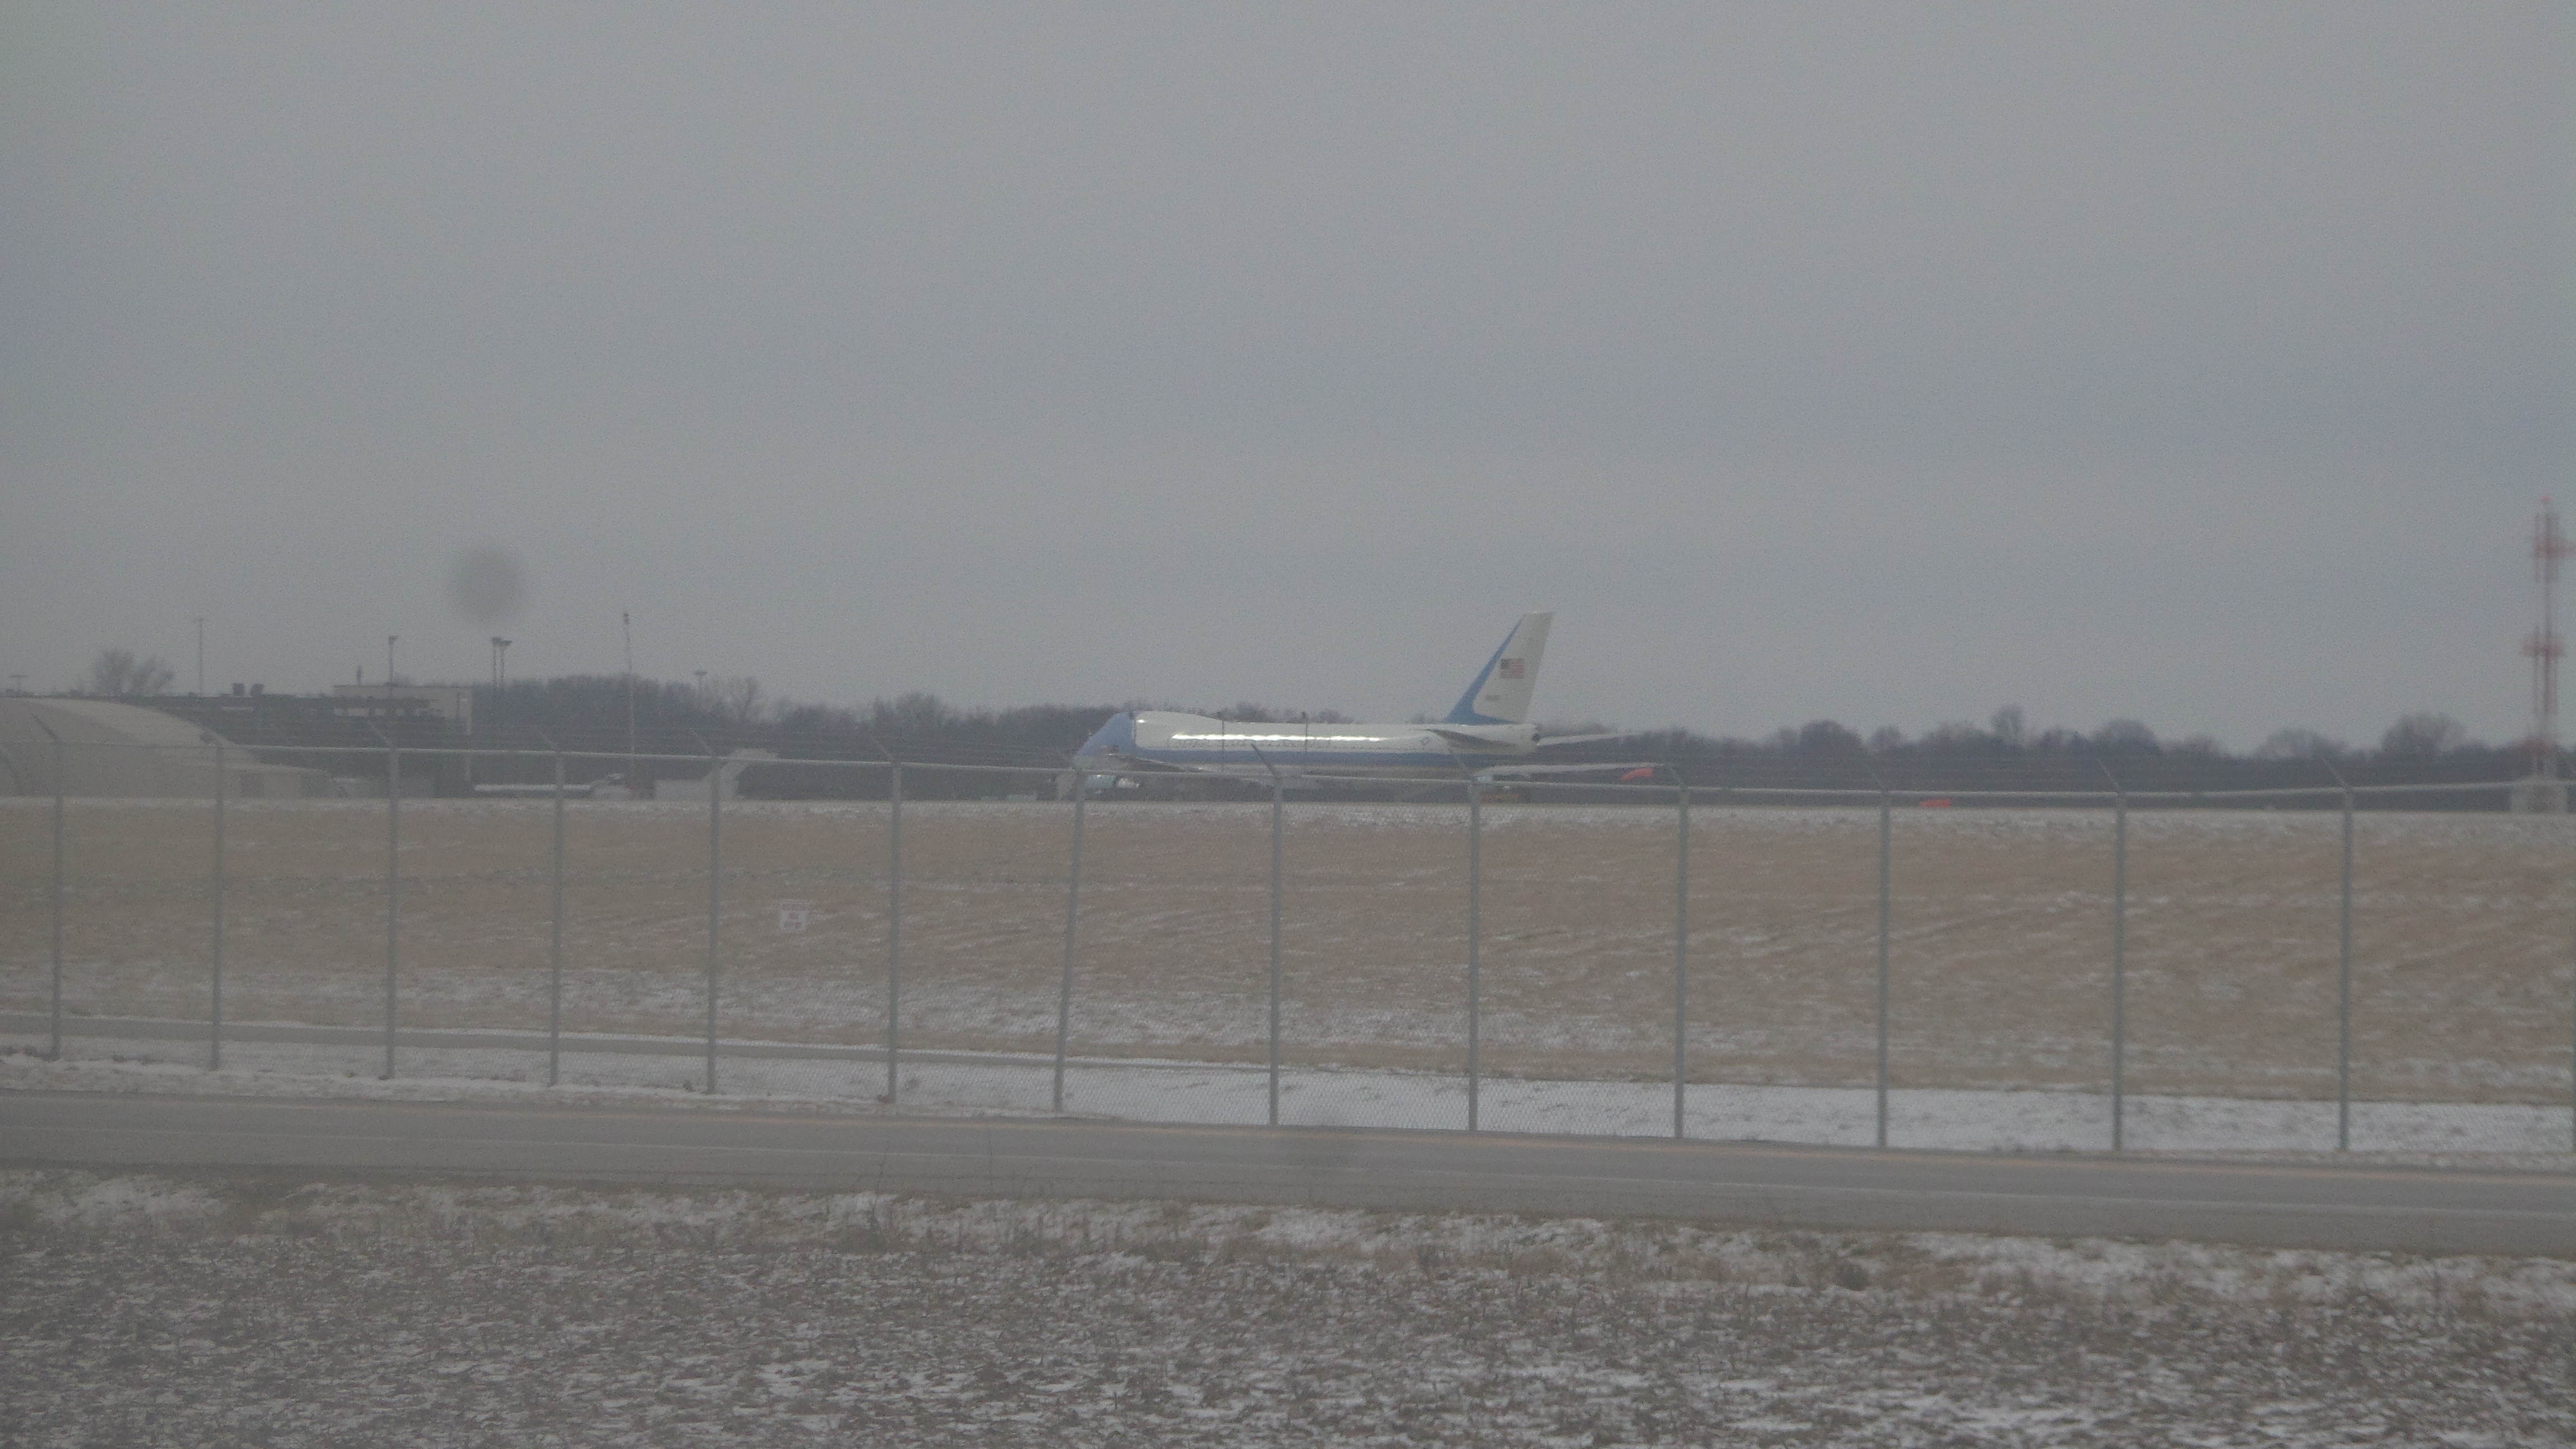 Air Force One Eagle has landed